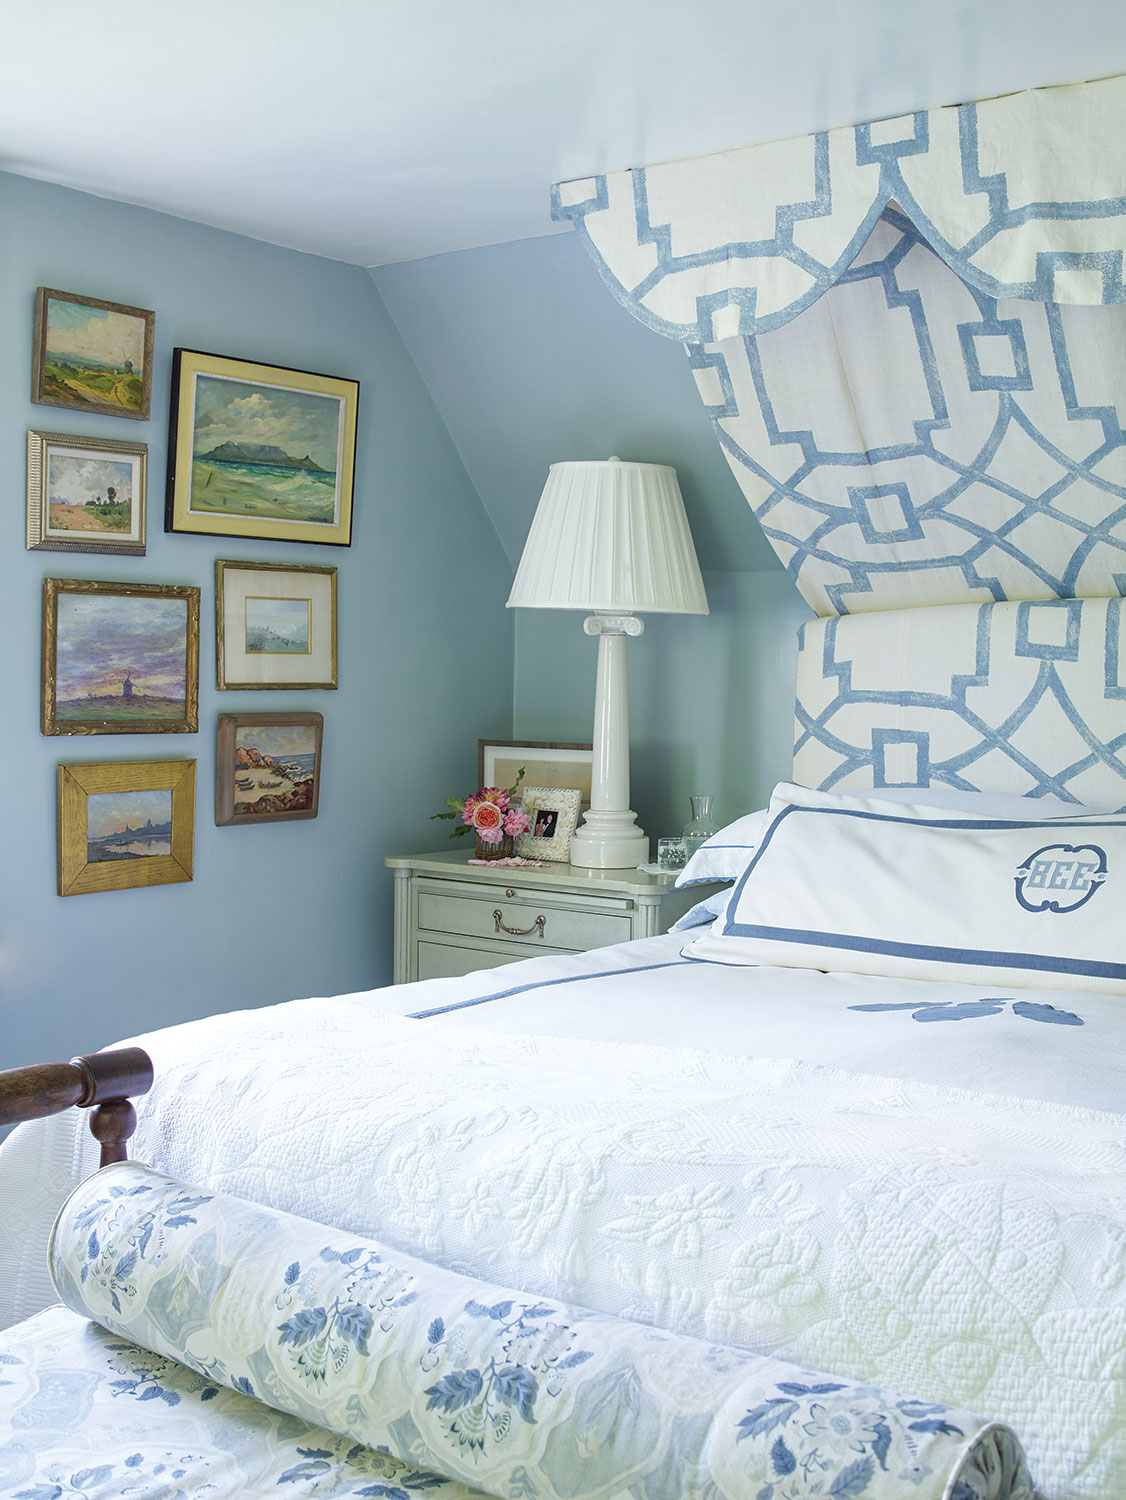 ky-blue walls and cloud-white bedding trimmed in blue. A half-canopy camouflages the sloped ceiling while creating height and adding drama to the master bedroom